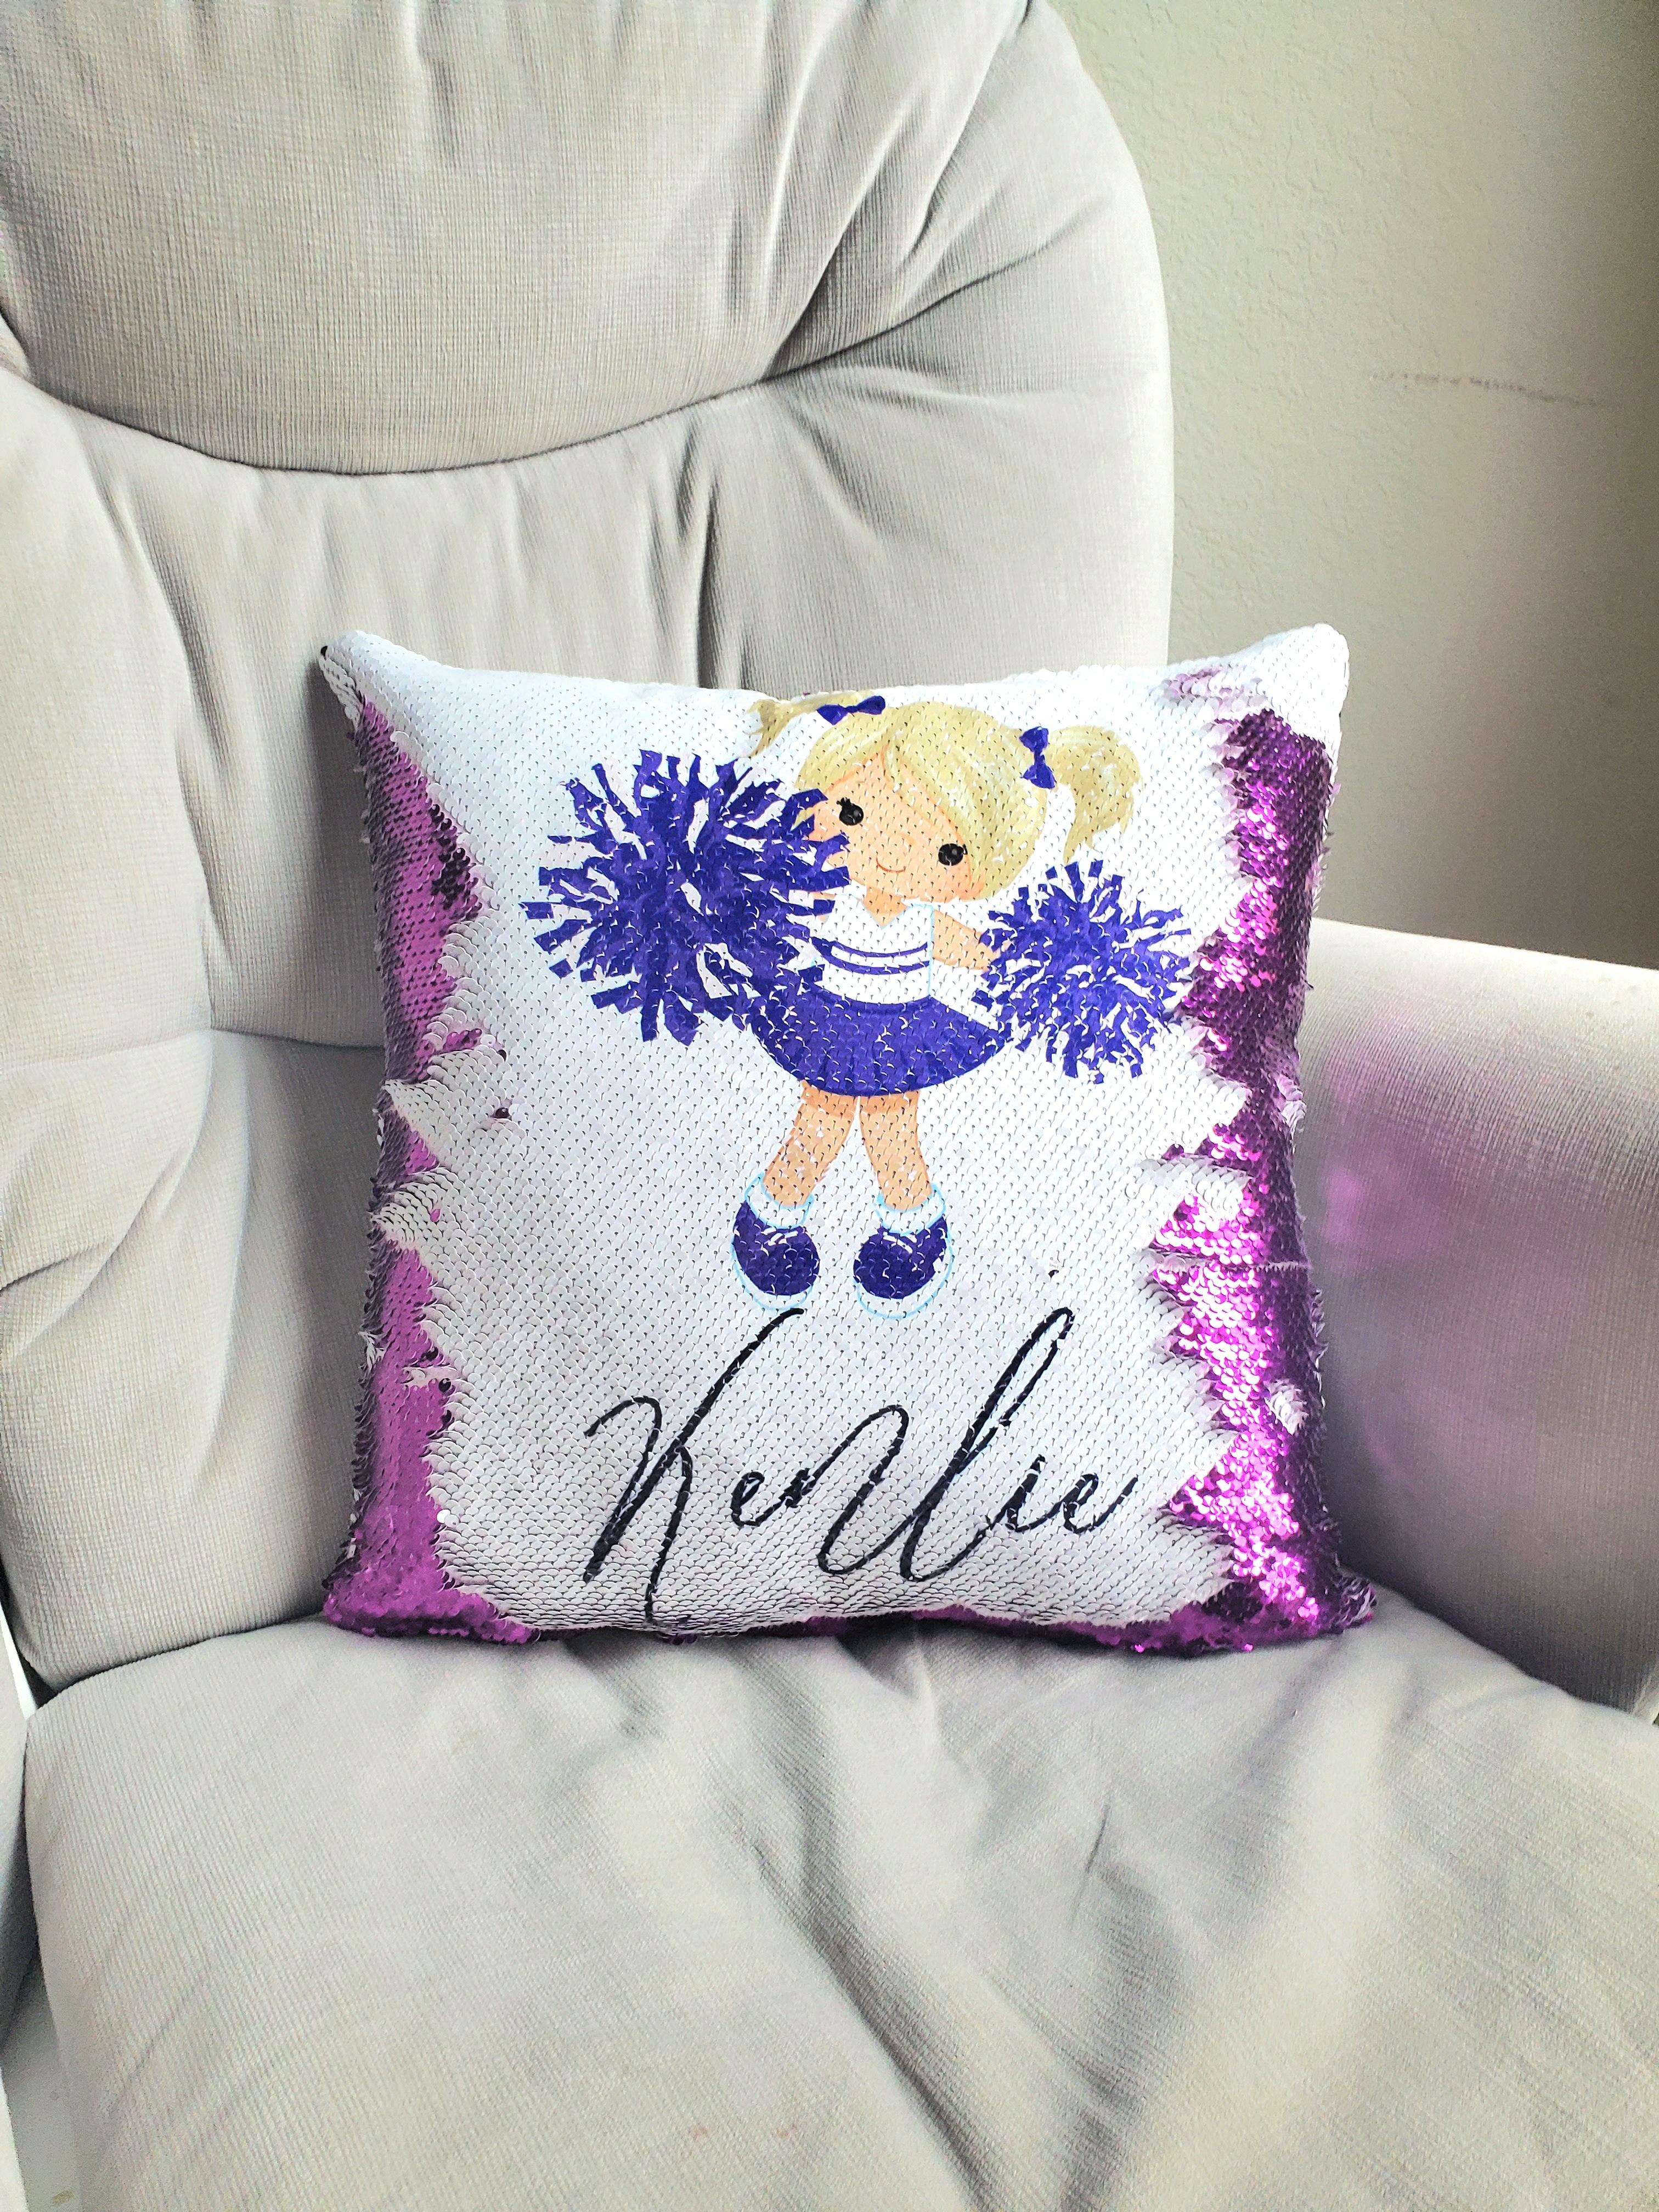 Looking for a Unique Cheer Gift? Are you planning a Cheerleader Birthday Party or Event? This pillow adds a special touch to the décor! This personalized decorative Cheer pillow makes a great gift for any birthday girl who loves Cheerleading and is a great décor idea for the child's room, nursery room or play room. It is useful to enjoy during a movie/ tv time or when taking a nap on the sofa, couch, bed or car, etc. 